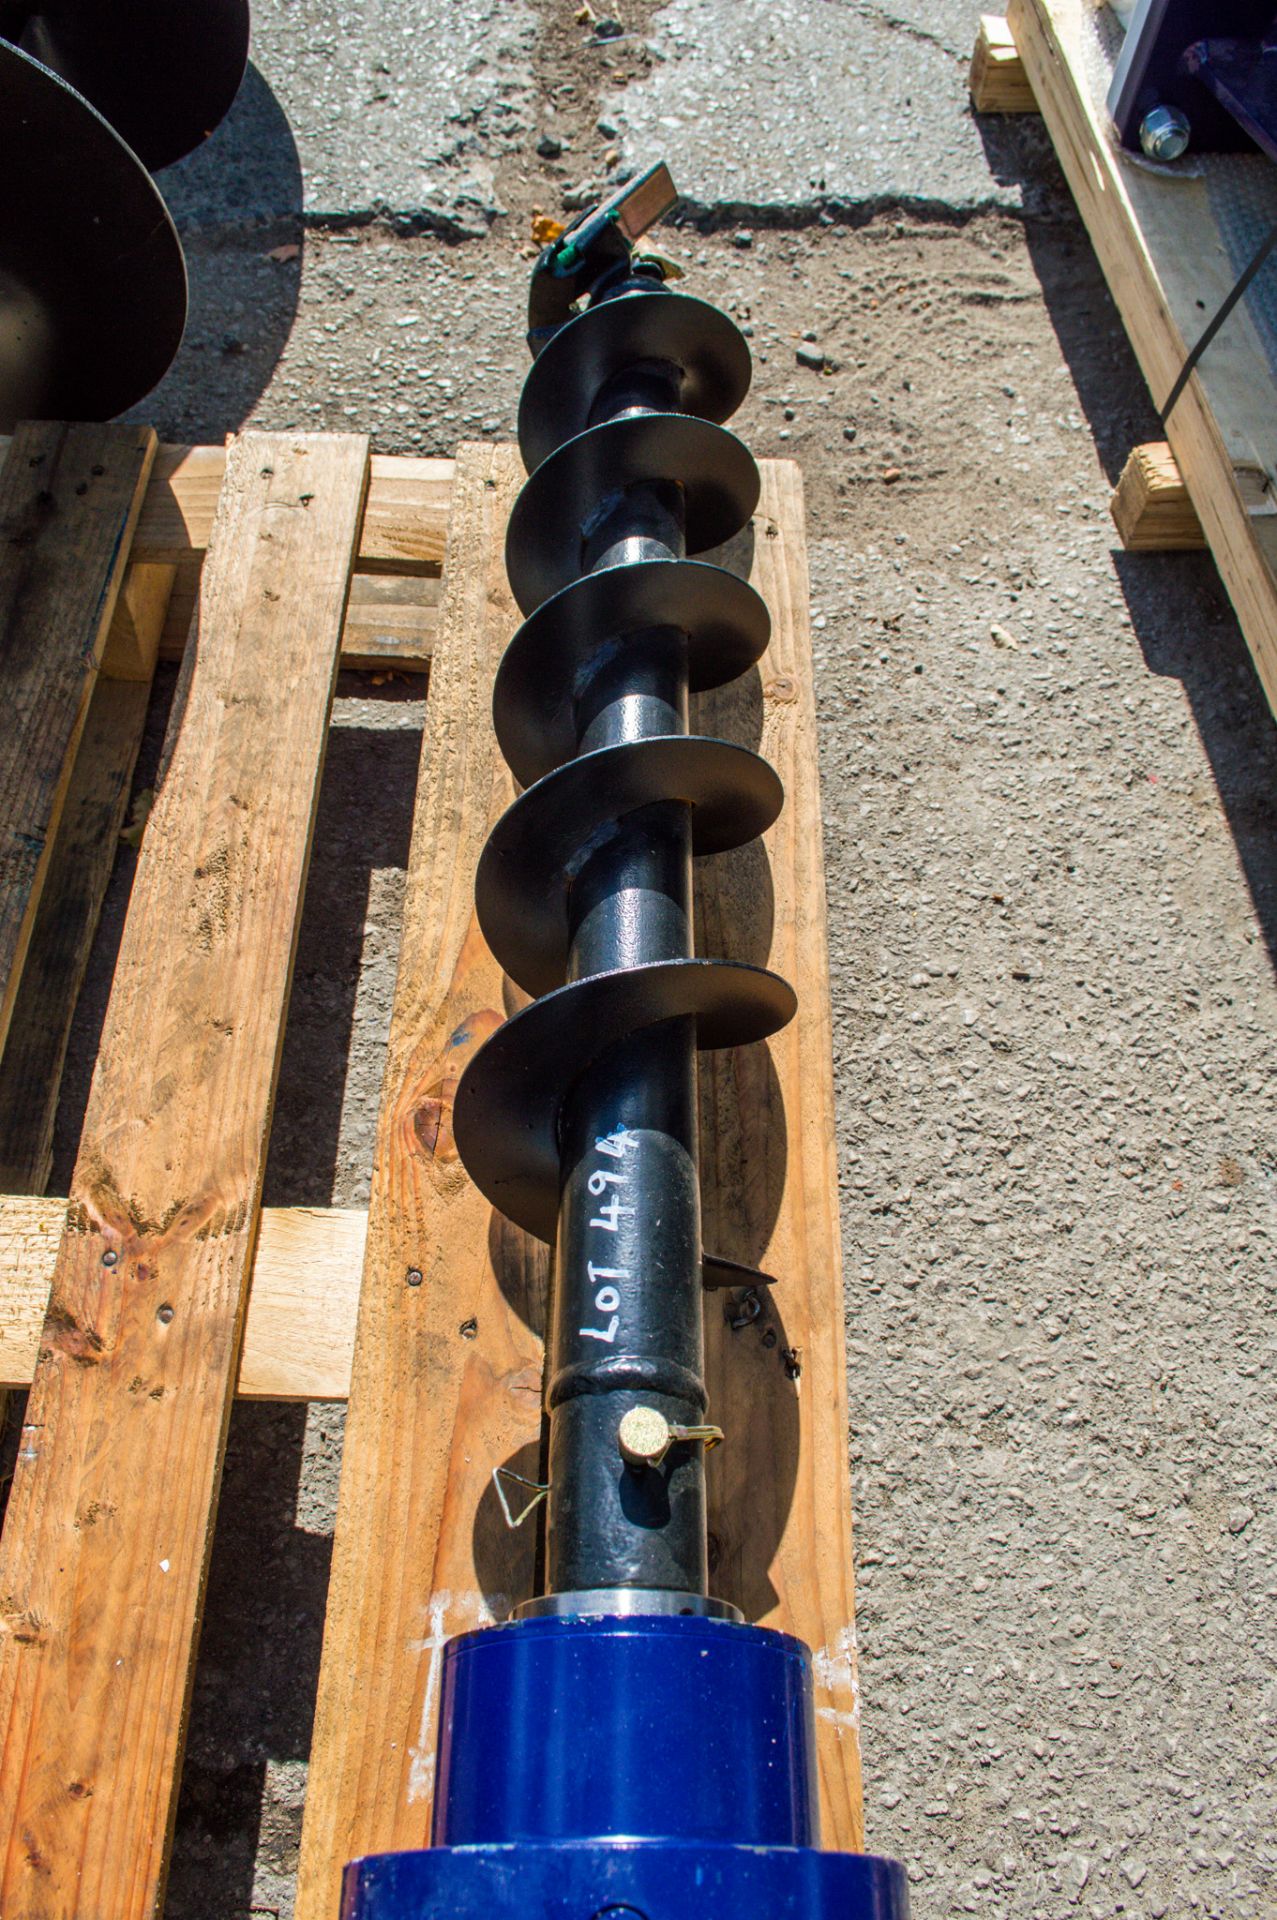 Hirox hydraulic auger attachment to suit 1.5 tonne excavator ** New and unused ** - Image 2 of 3